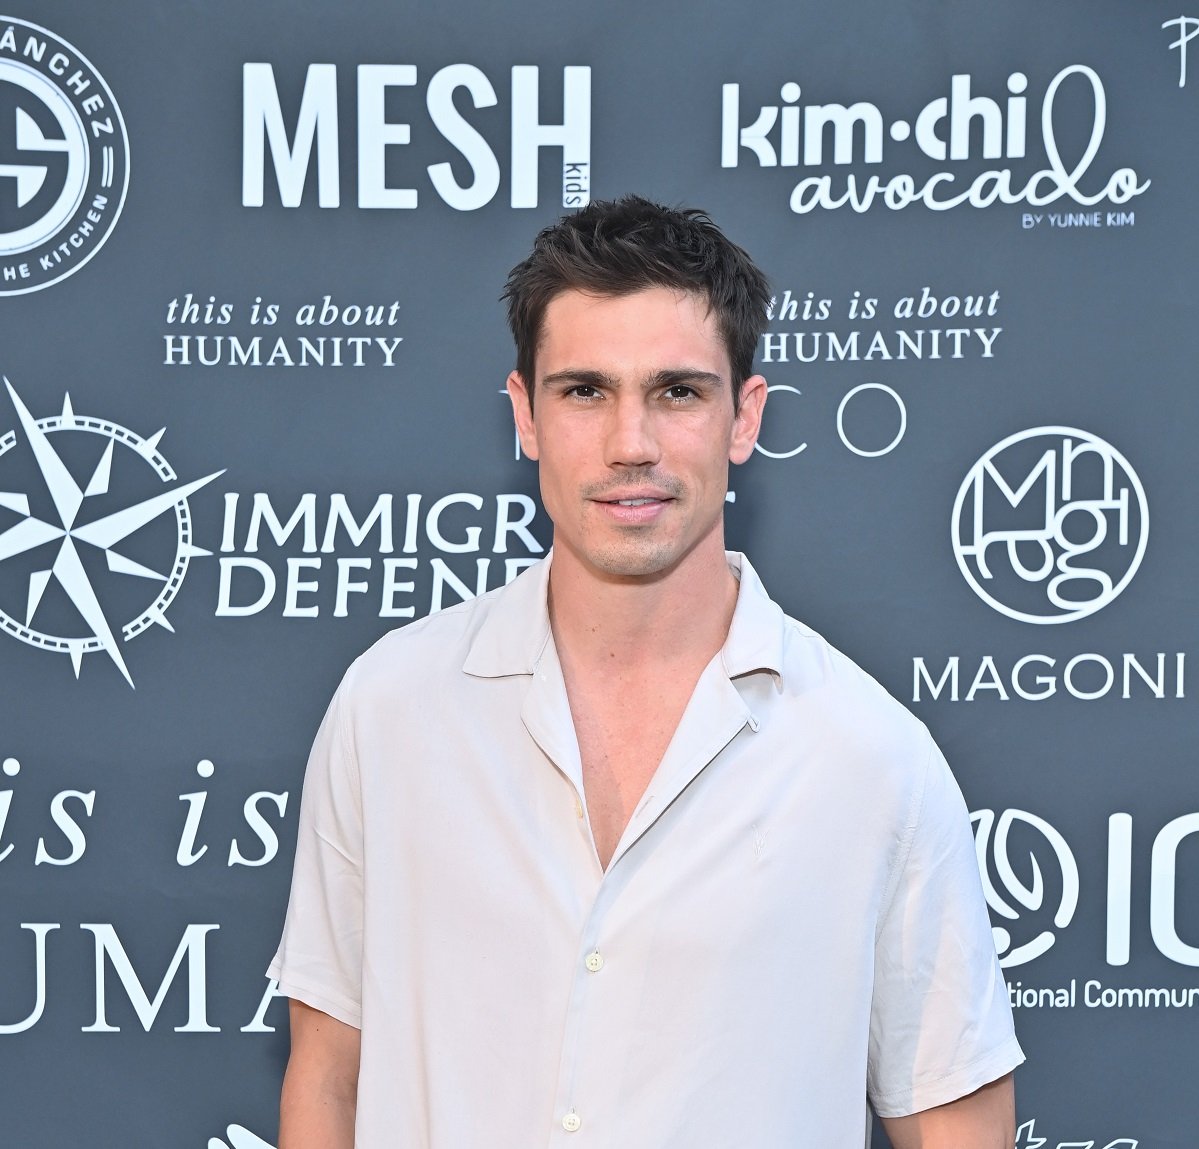 'The Bold and the Beautiful' star Tanner Novlan wearing a white shirt and smiling during a red carpet appearance.